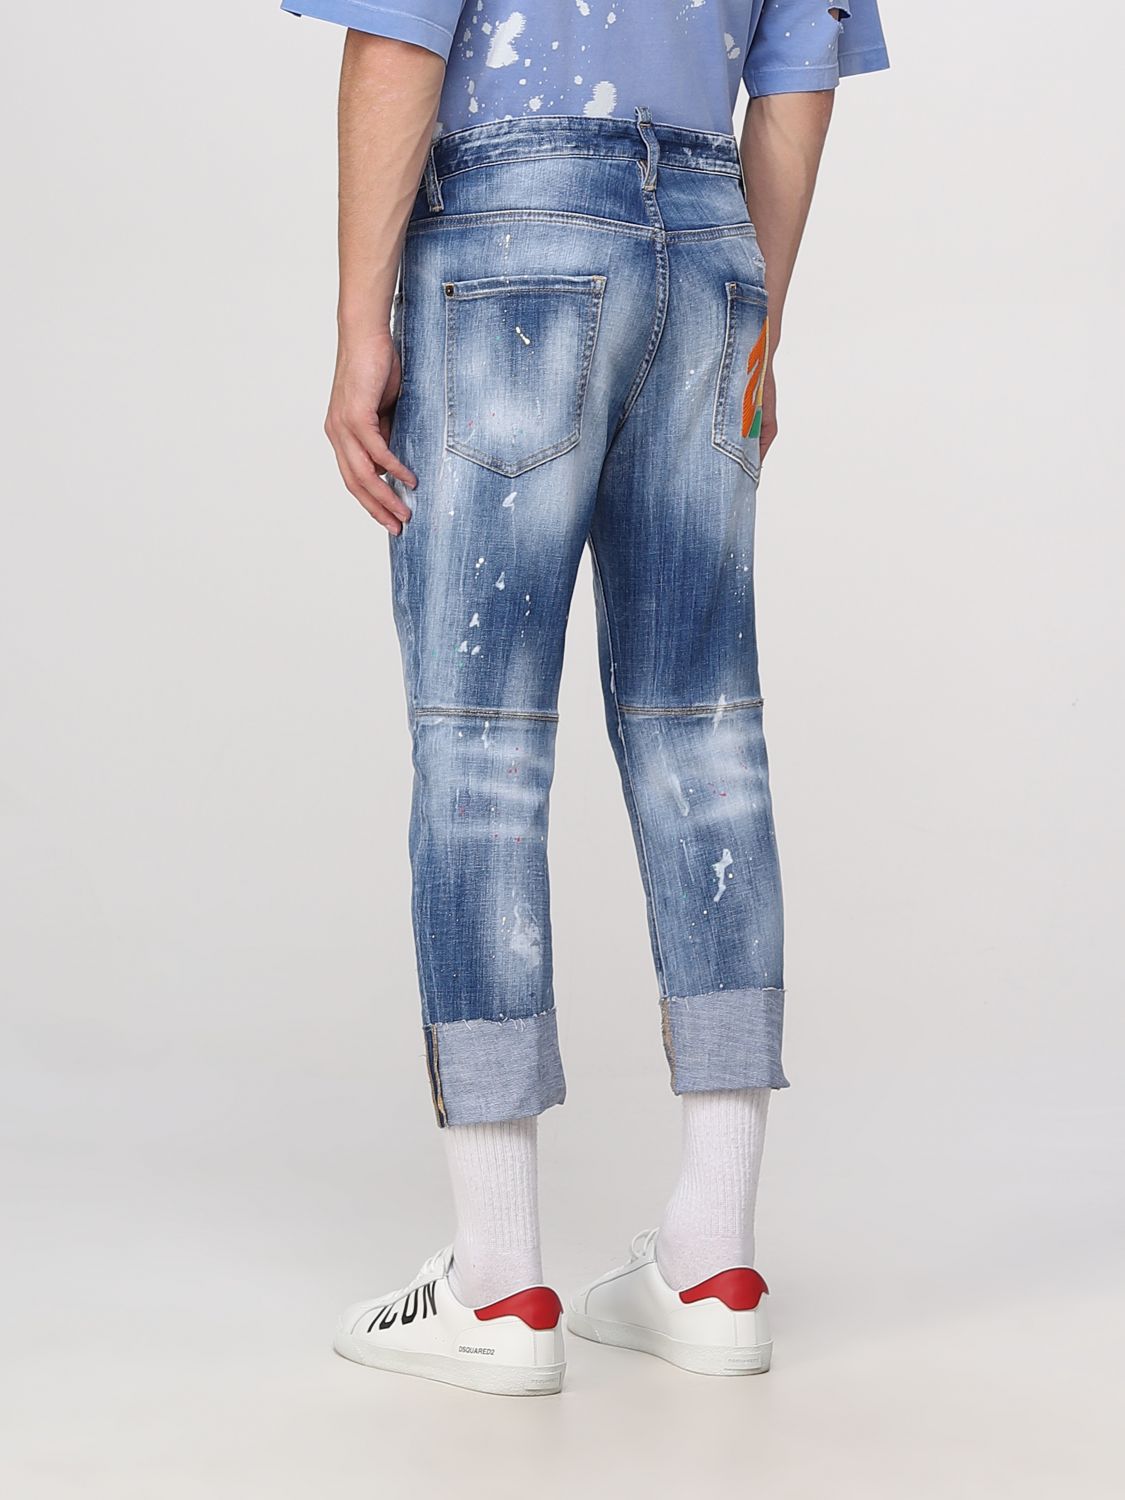 Jeans Dsquared2: Jeans Dsquared2 in denim effetto used blue navy 3